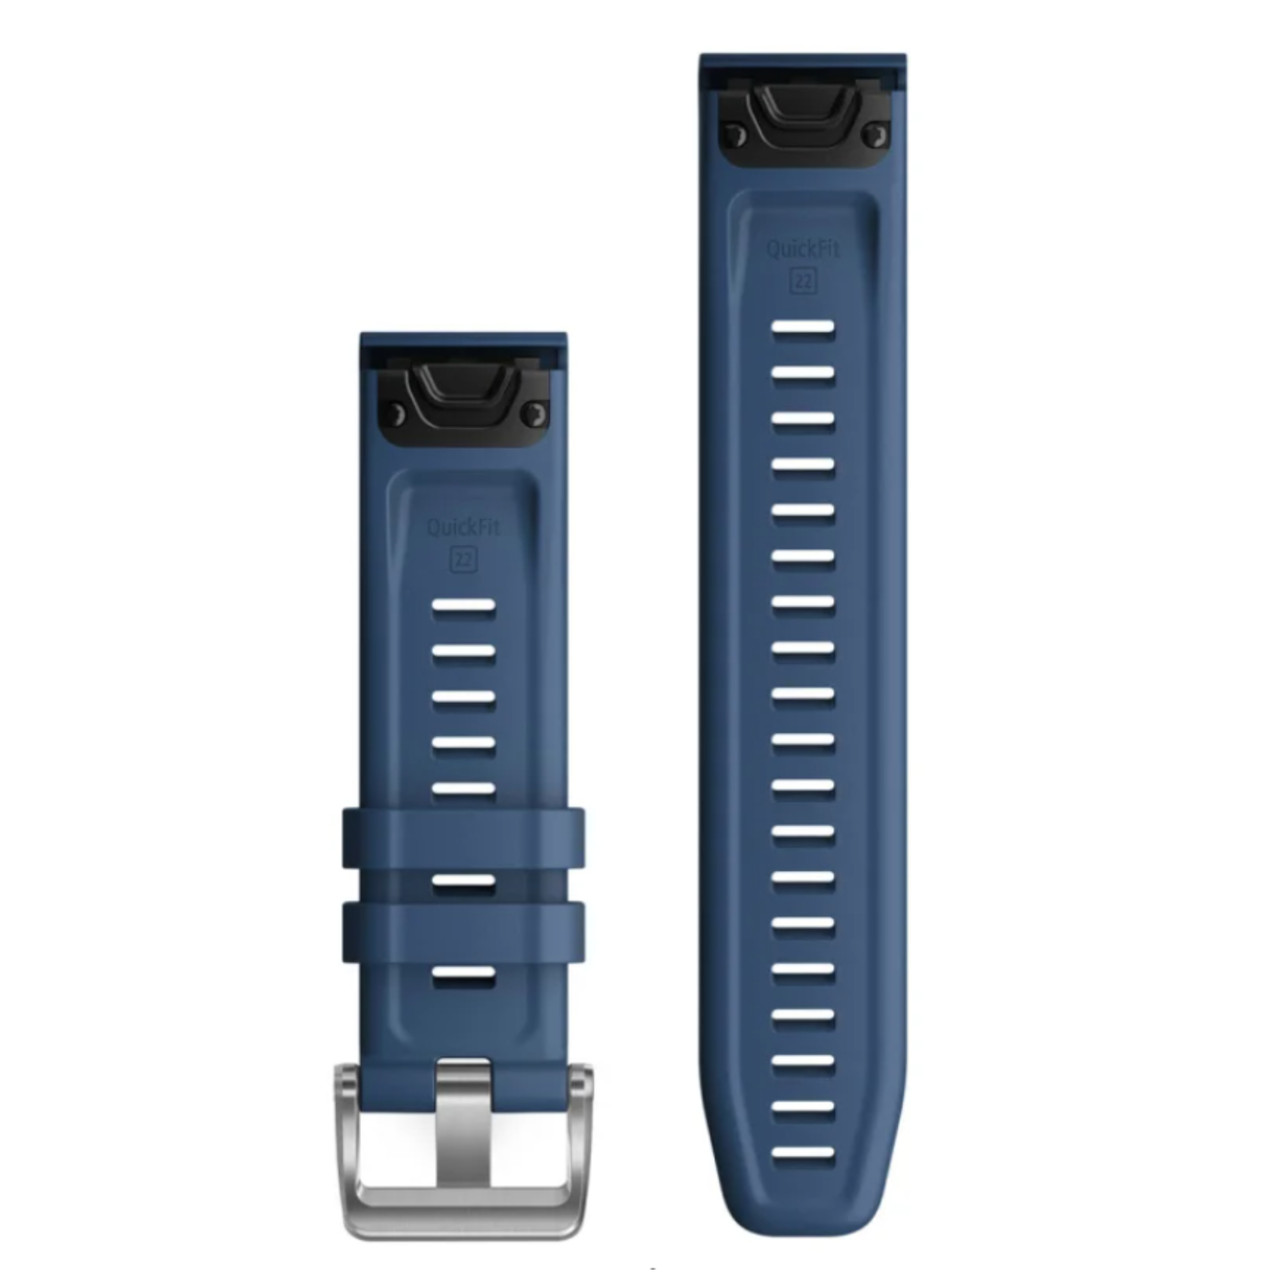 Garmin New OEM QuickFit® 22 Watch Bands Captain Blue Silicone, 010-12863-21